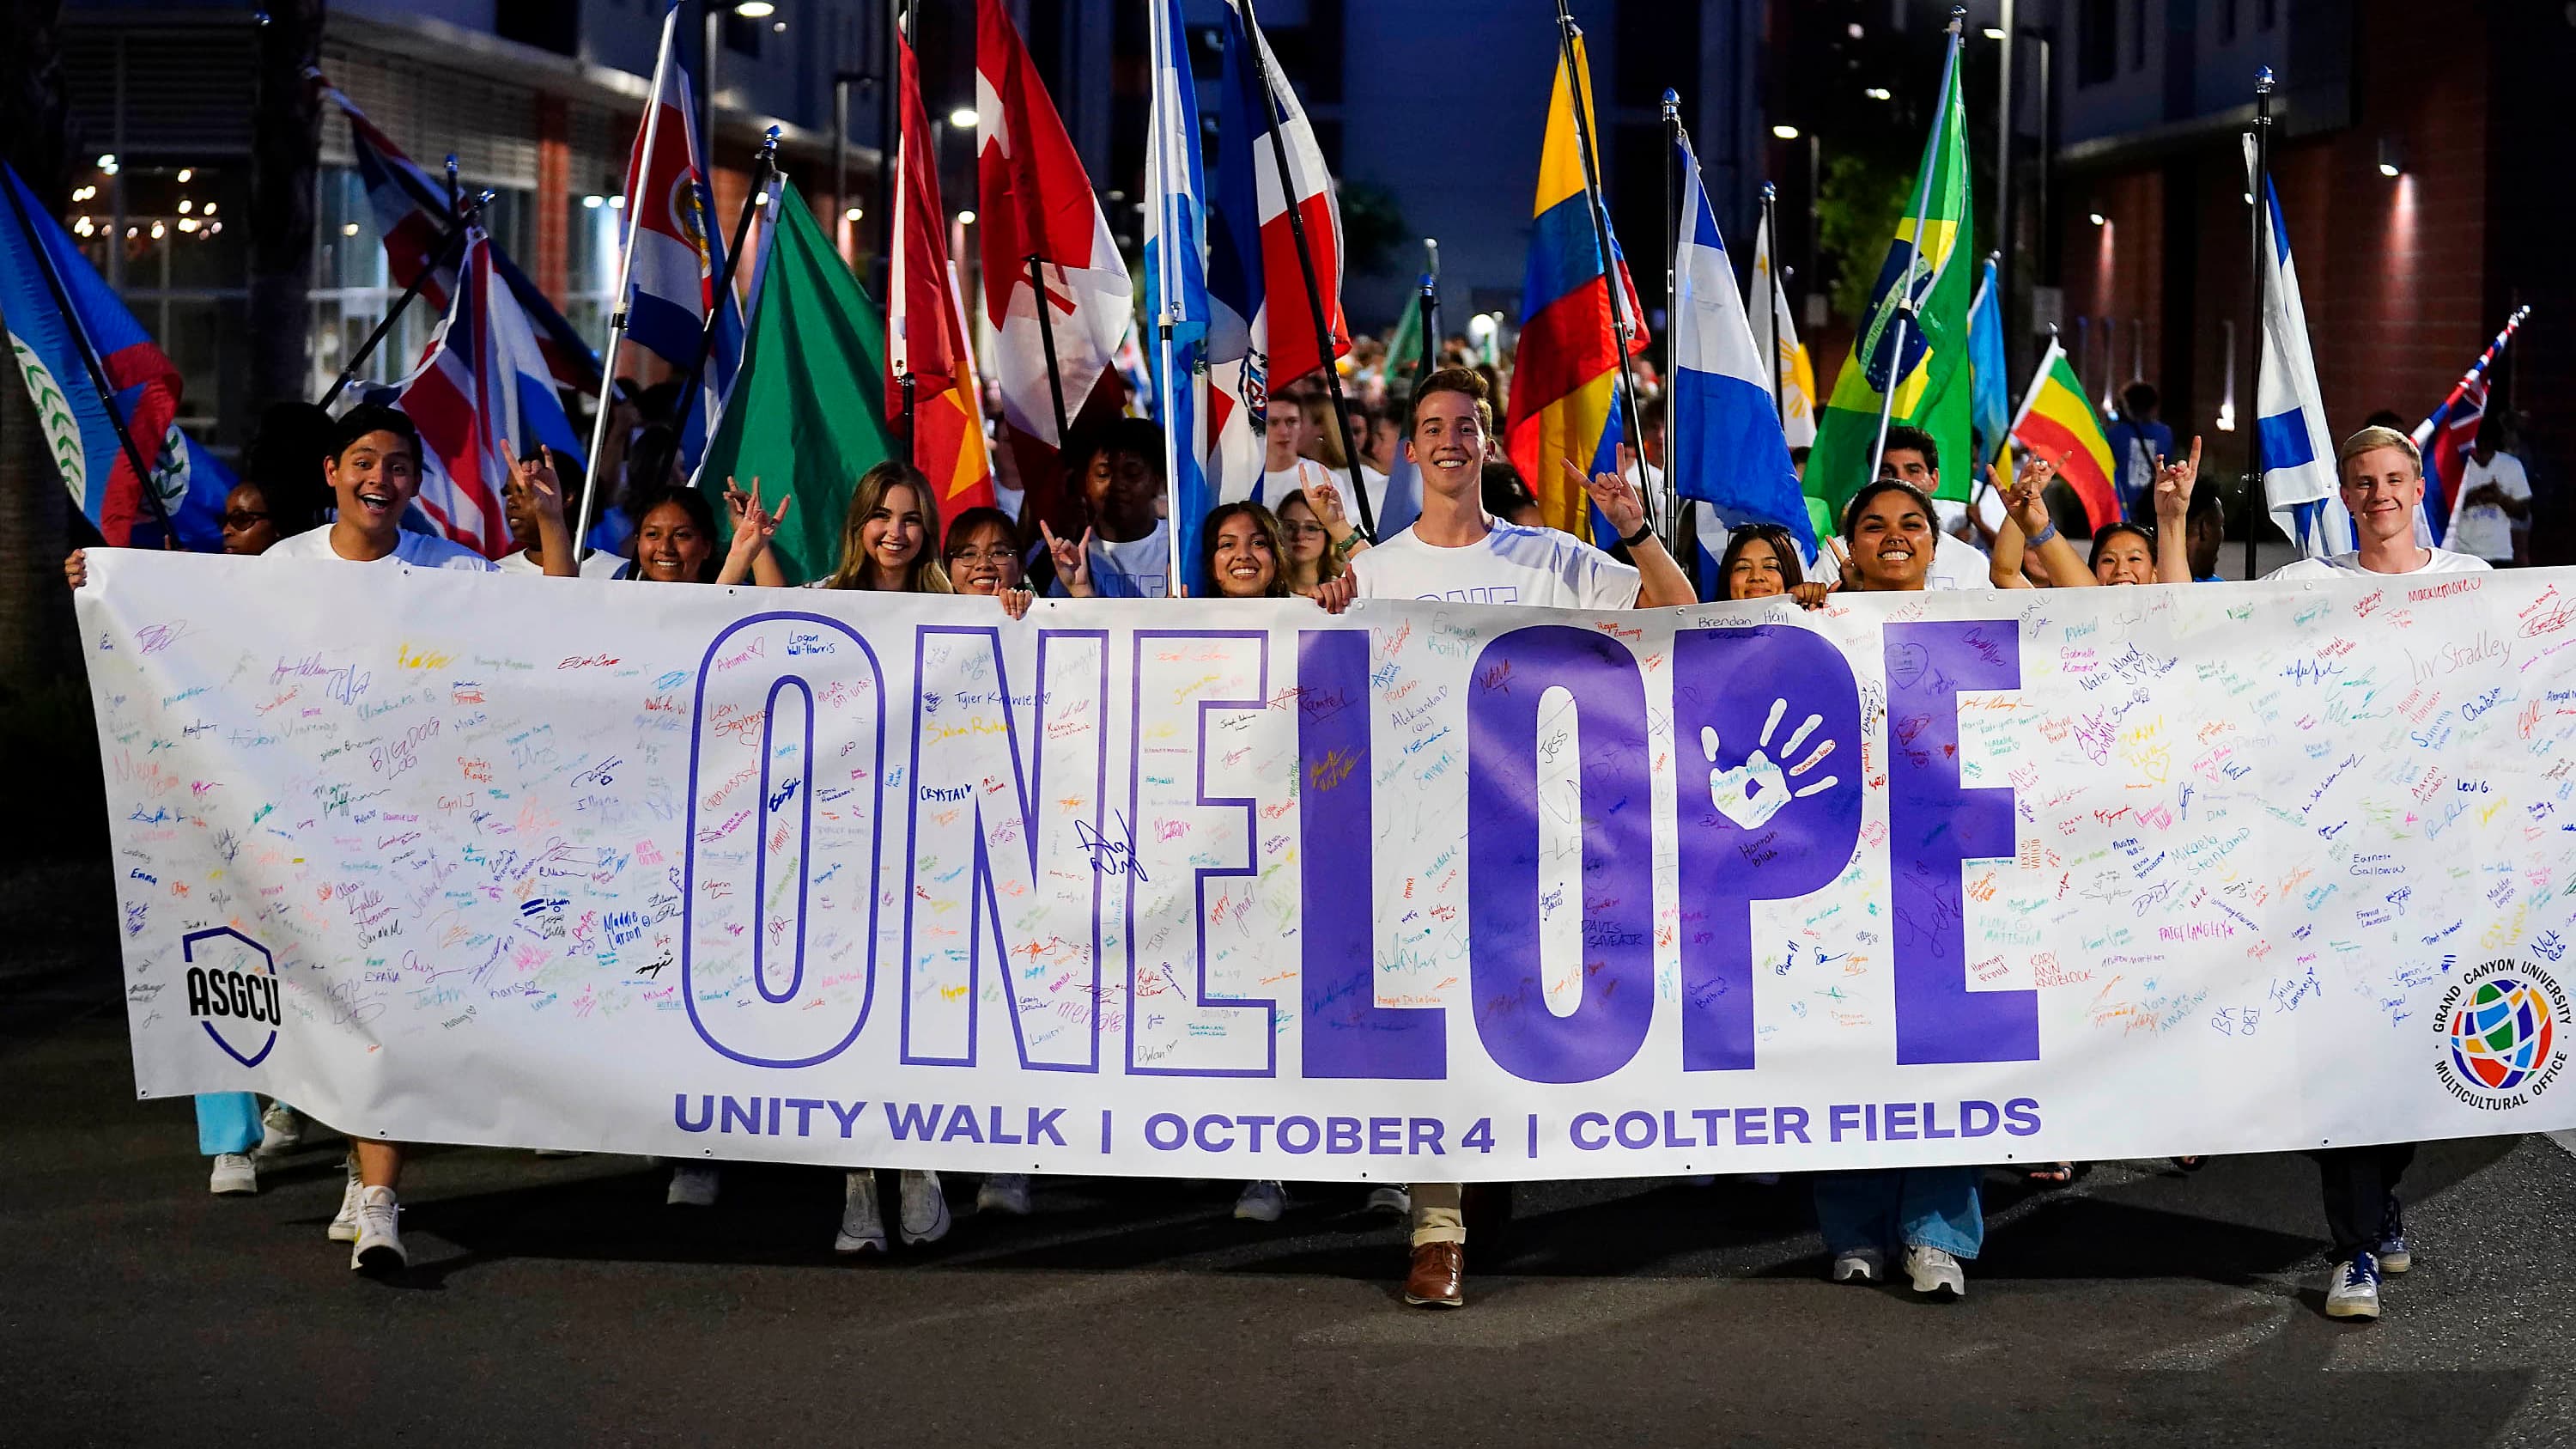 GCU Students at GCU Unity Walk with One Lope Sign